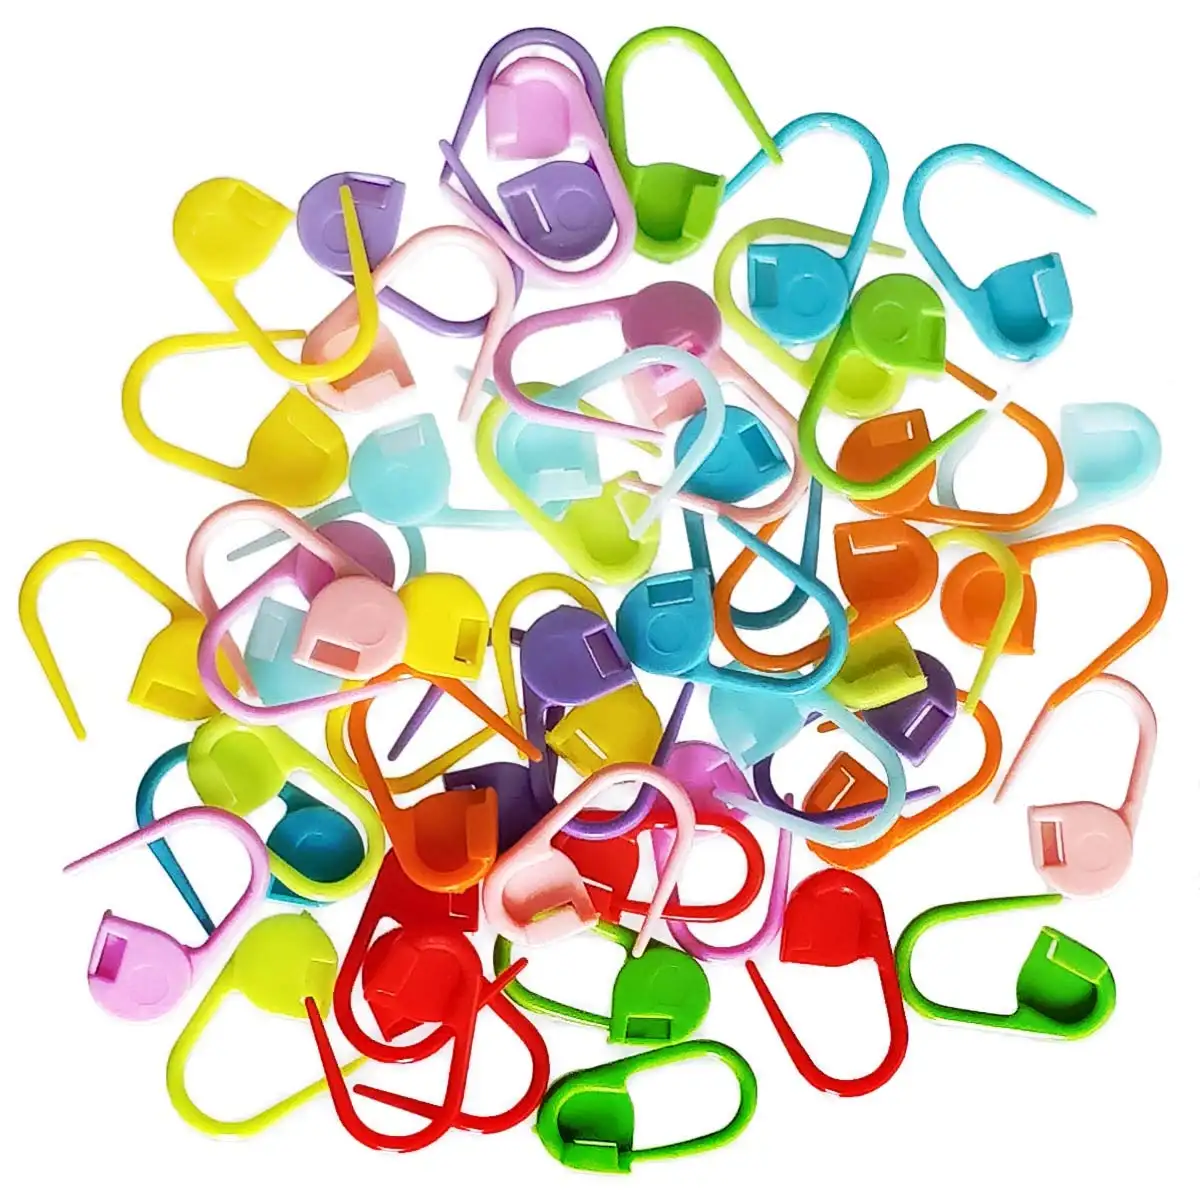 Wholesale 1000Pcs/packs Mixed Color Plastic Knitting Tool Knitting Needle Clip Hook Locking Stitch Markers